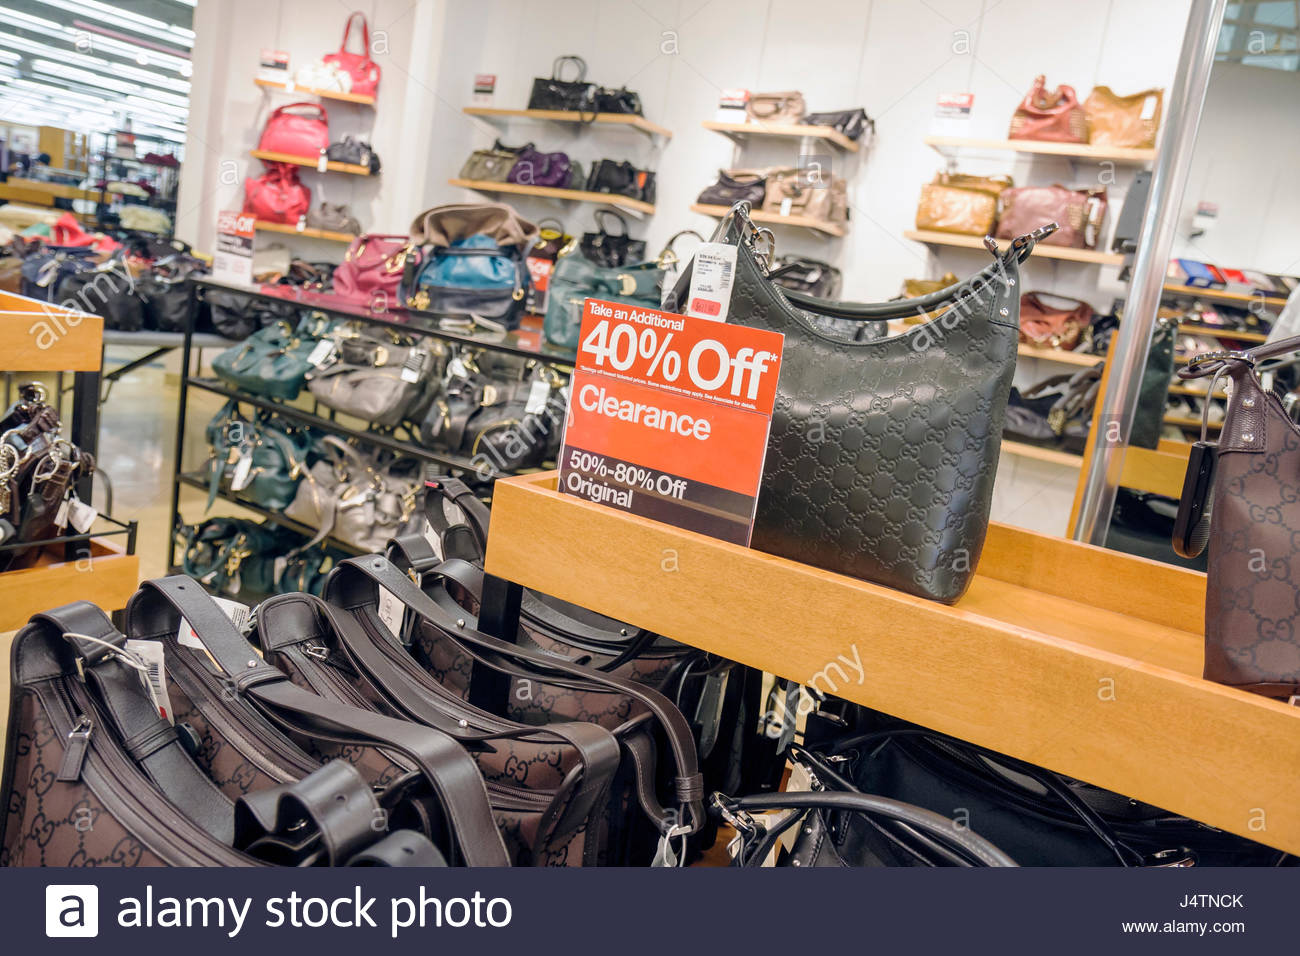 Gucci Mall Stock Photos & Gucci Mall Stock Images - Alamy1300 x 956